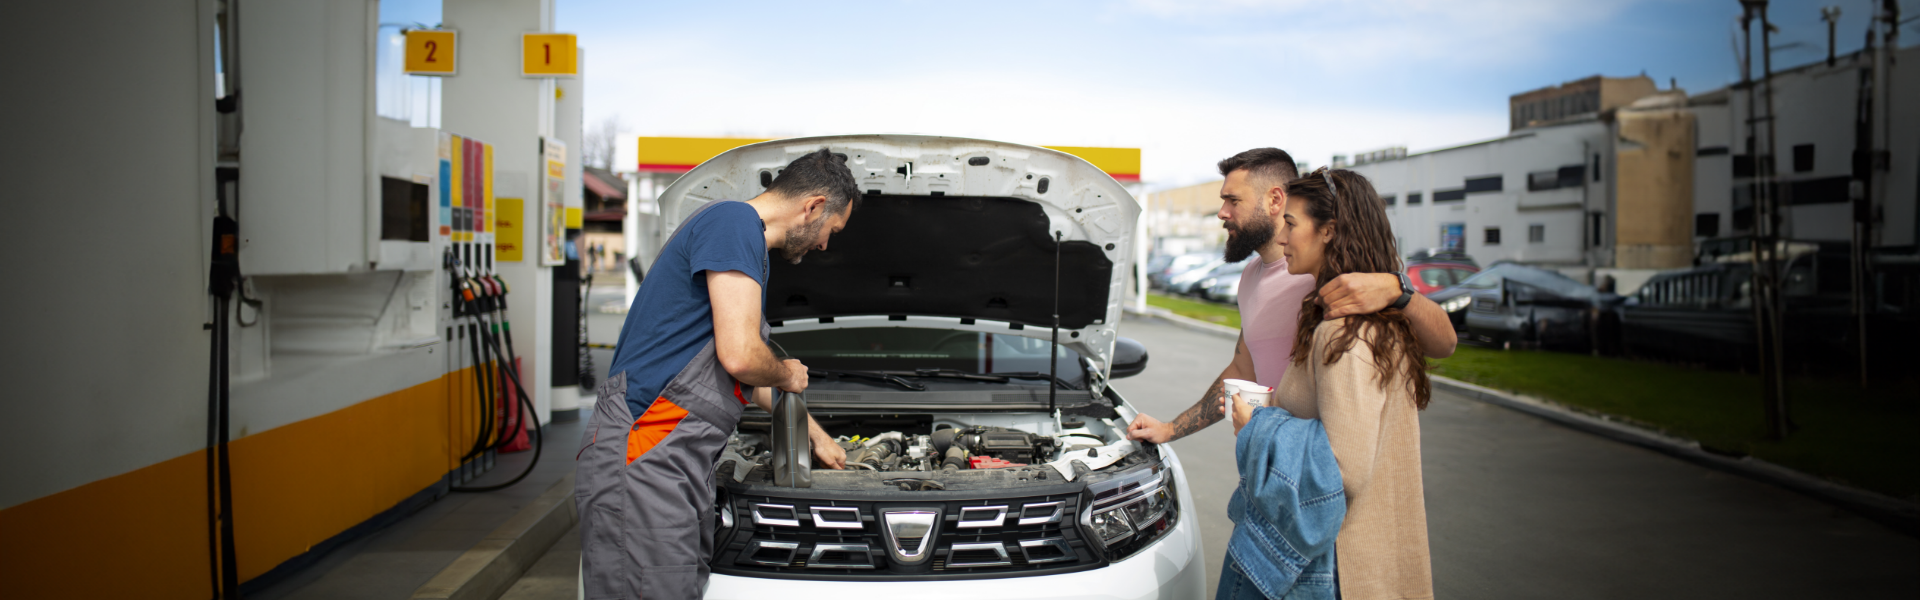 GET THE EXPERTS TIPS FOR HOW TO SAVE YOUR CAR PETROL AND DIESEL